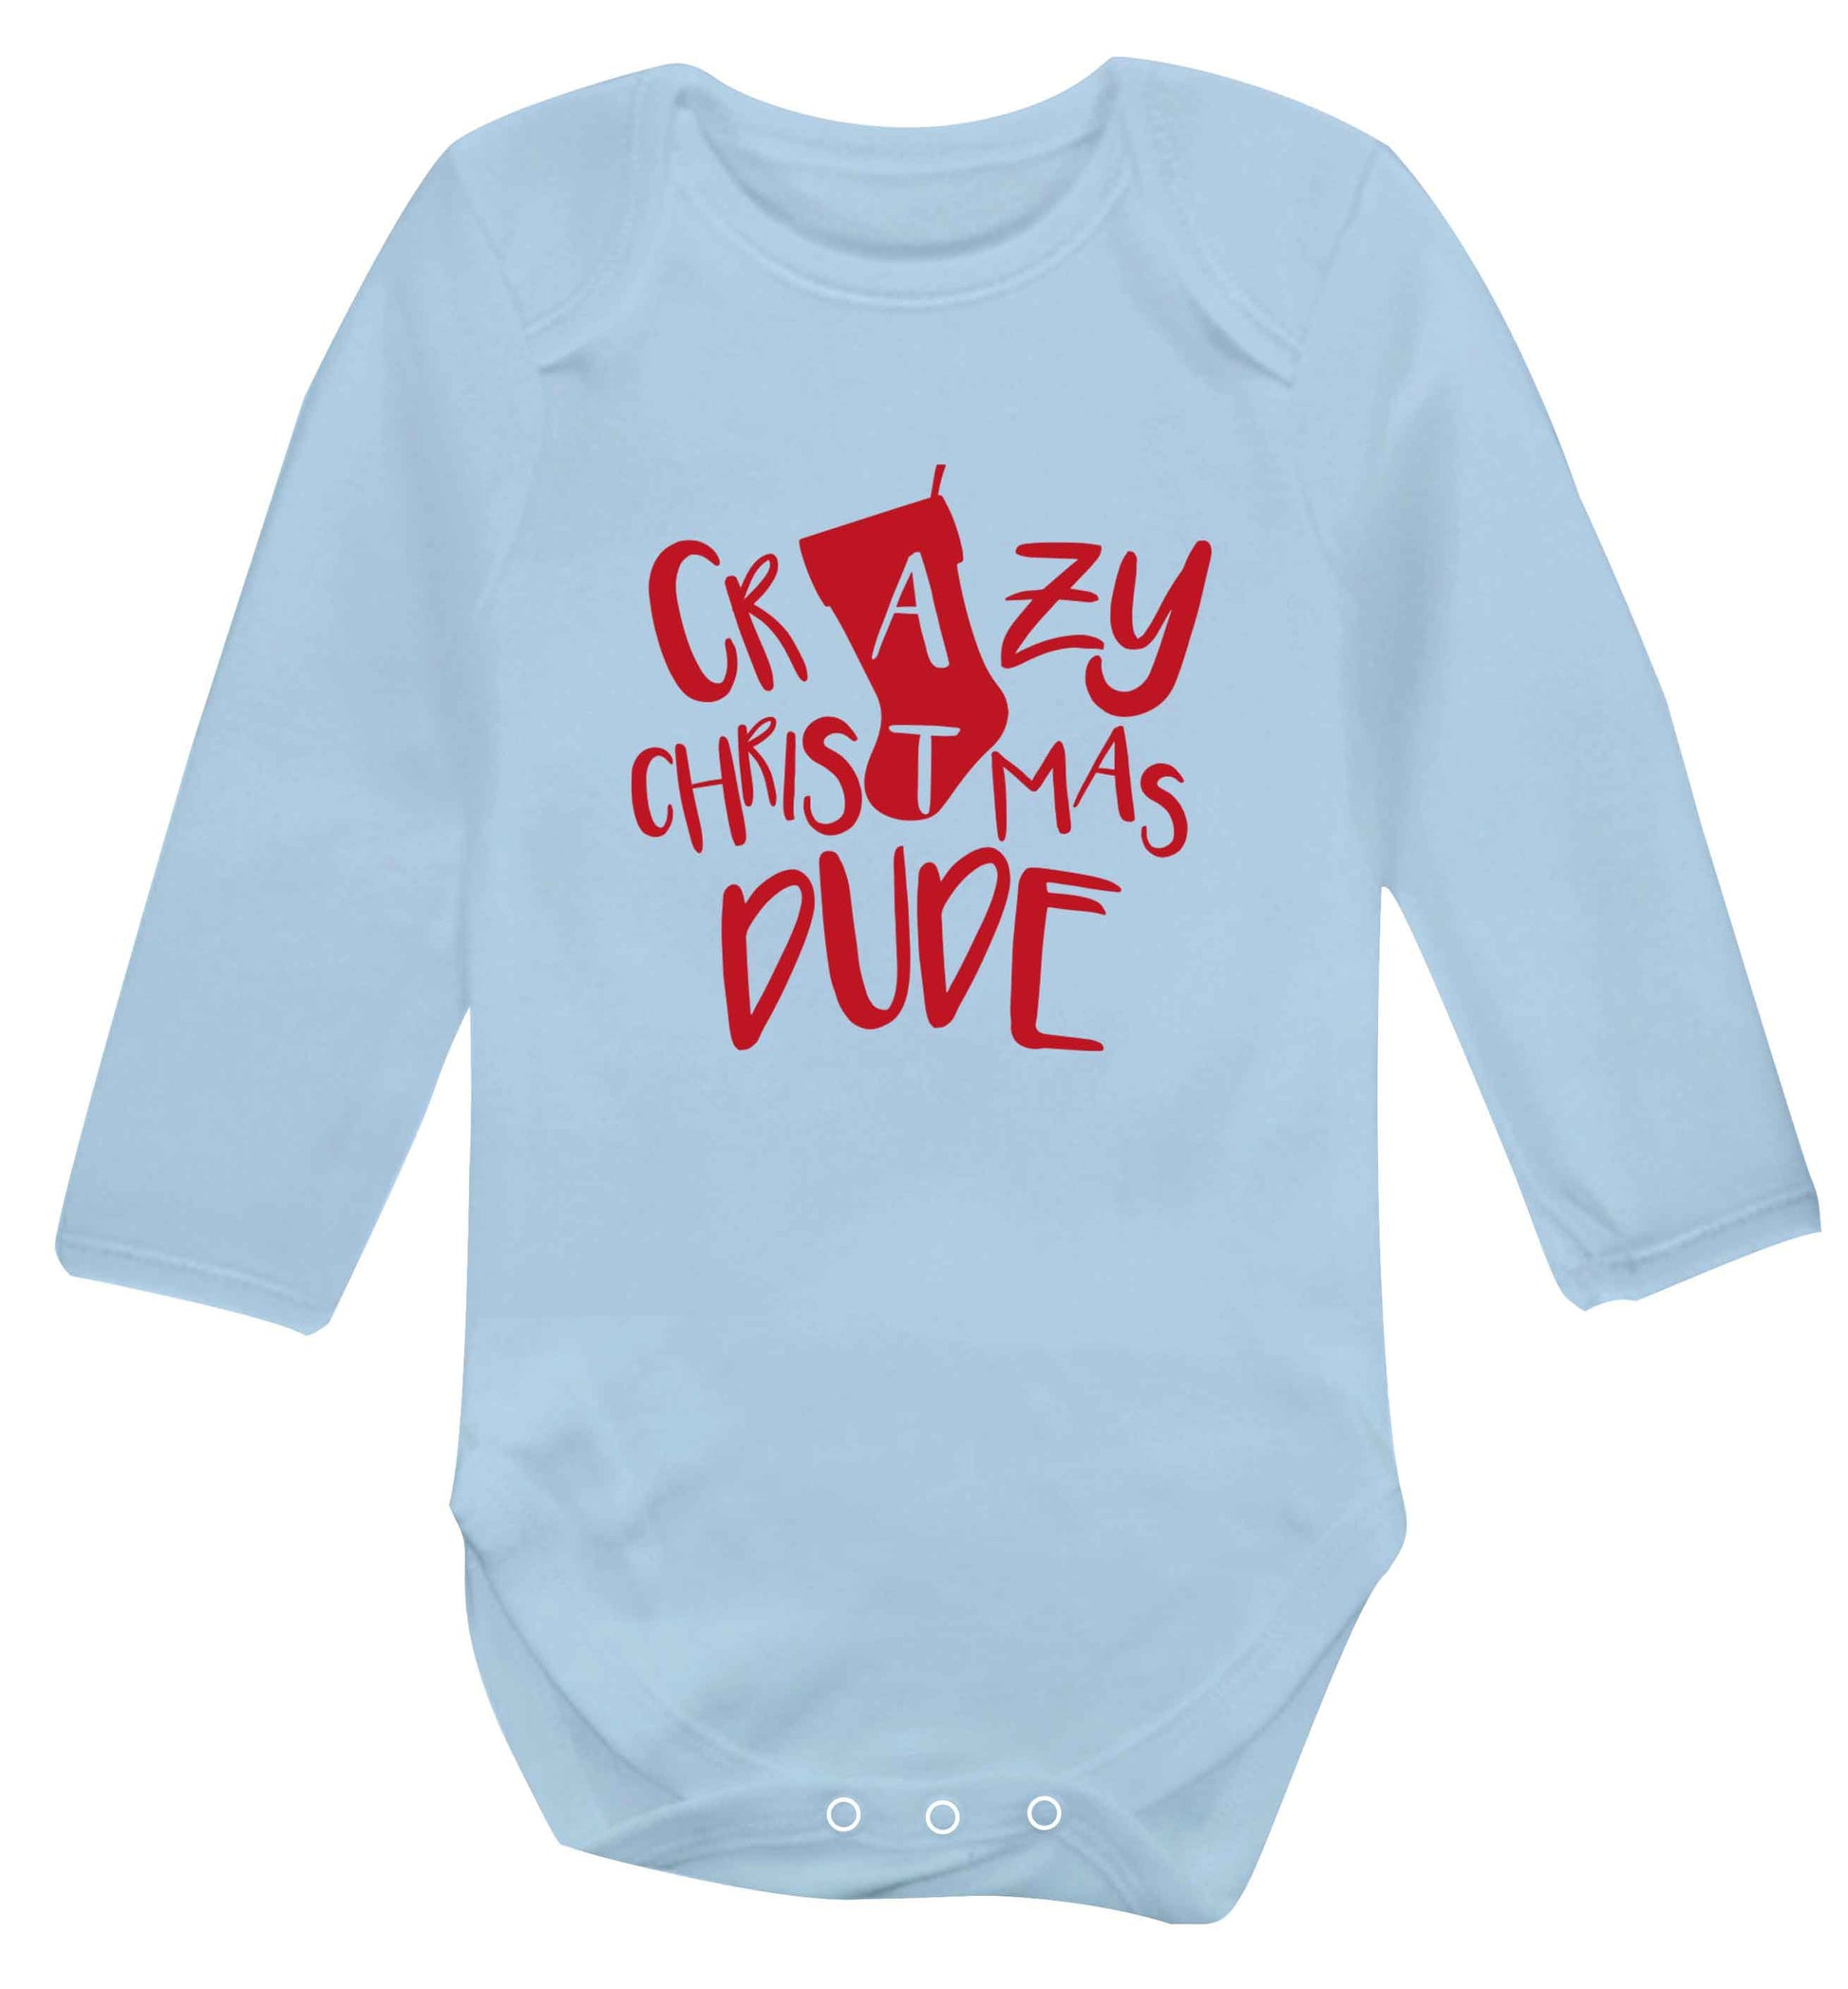 Crazy Christmas Dude baby vest long sleeved pale blue 6-12 months